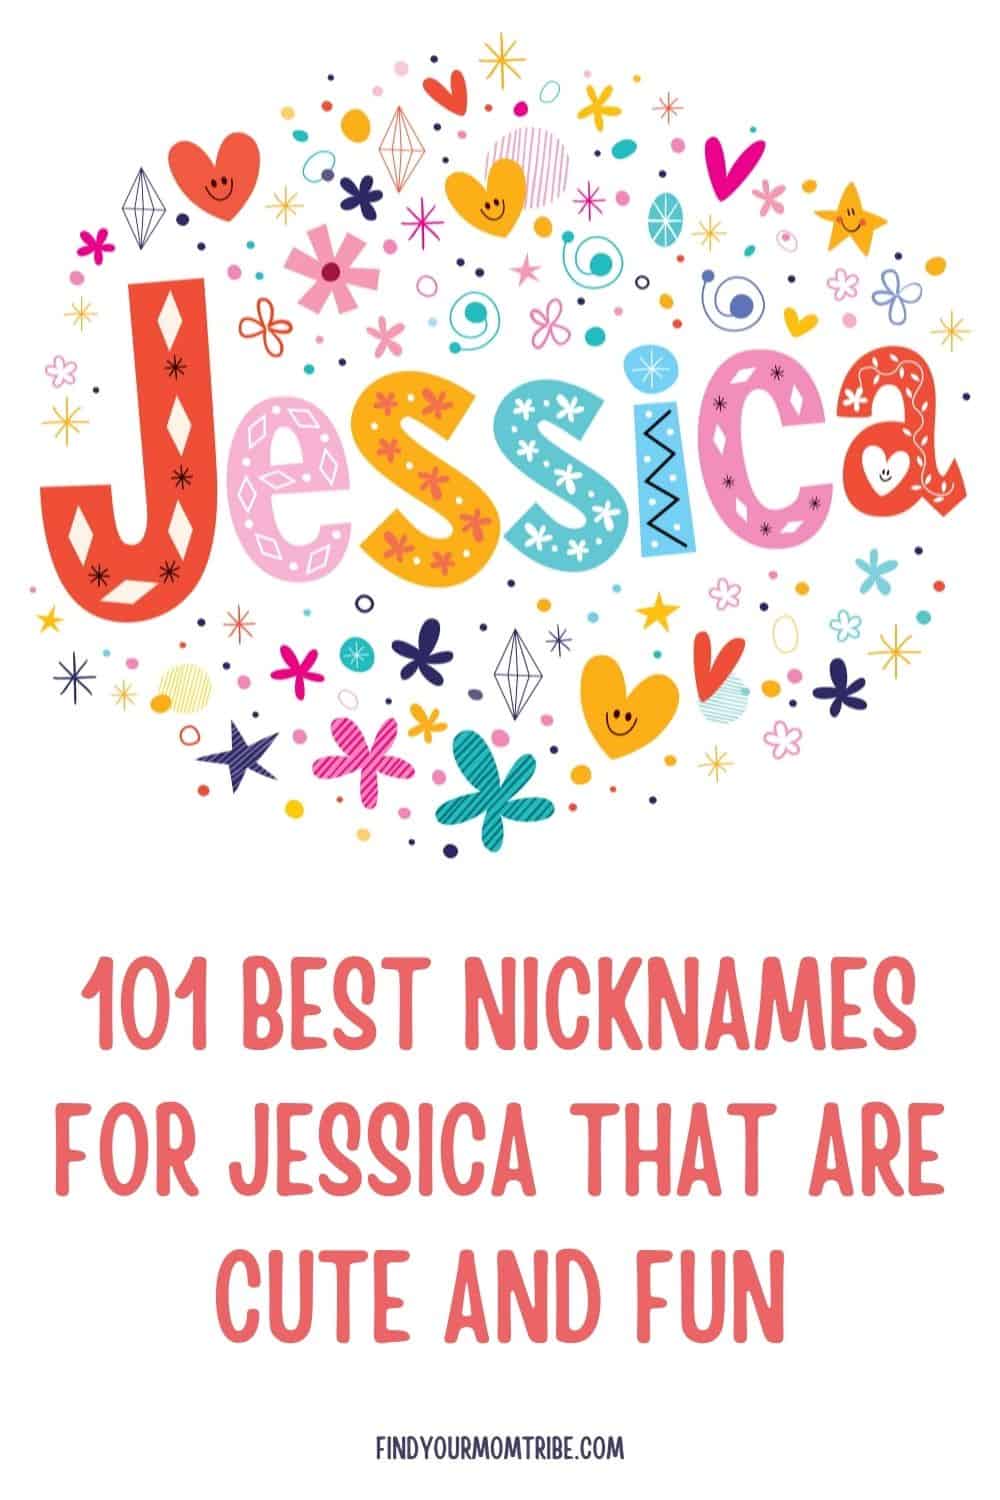 101 Best Nicknames For Jessica That Are Cute And Fun